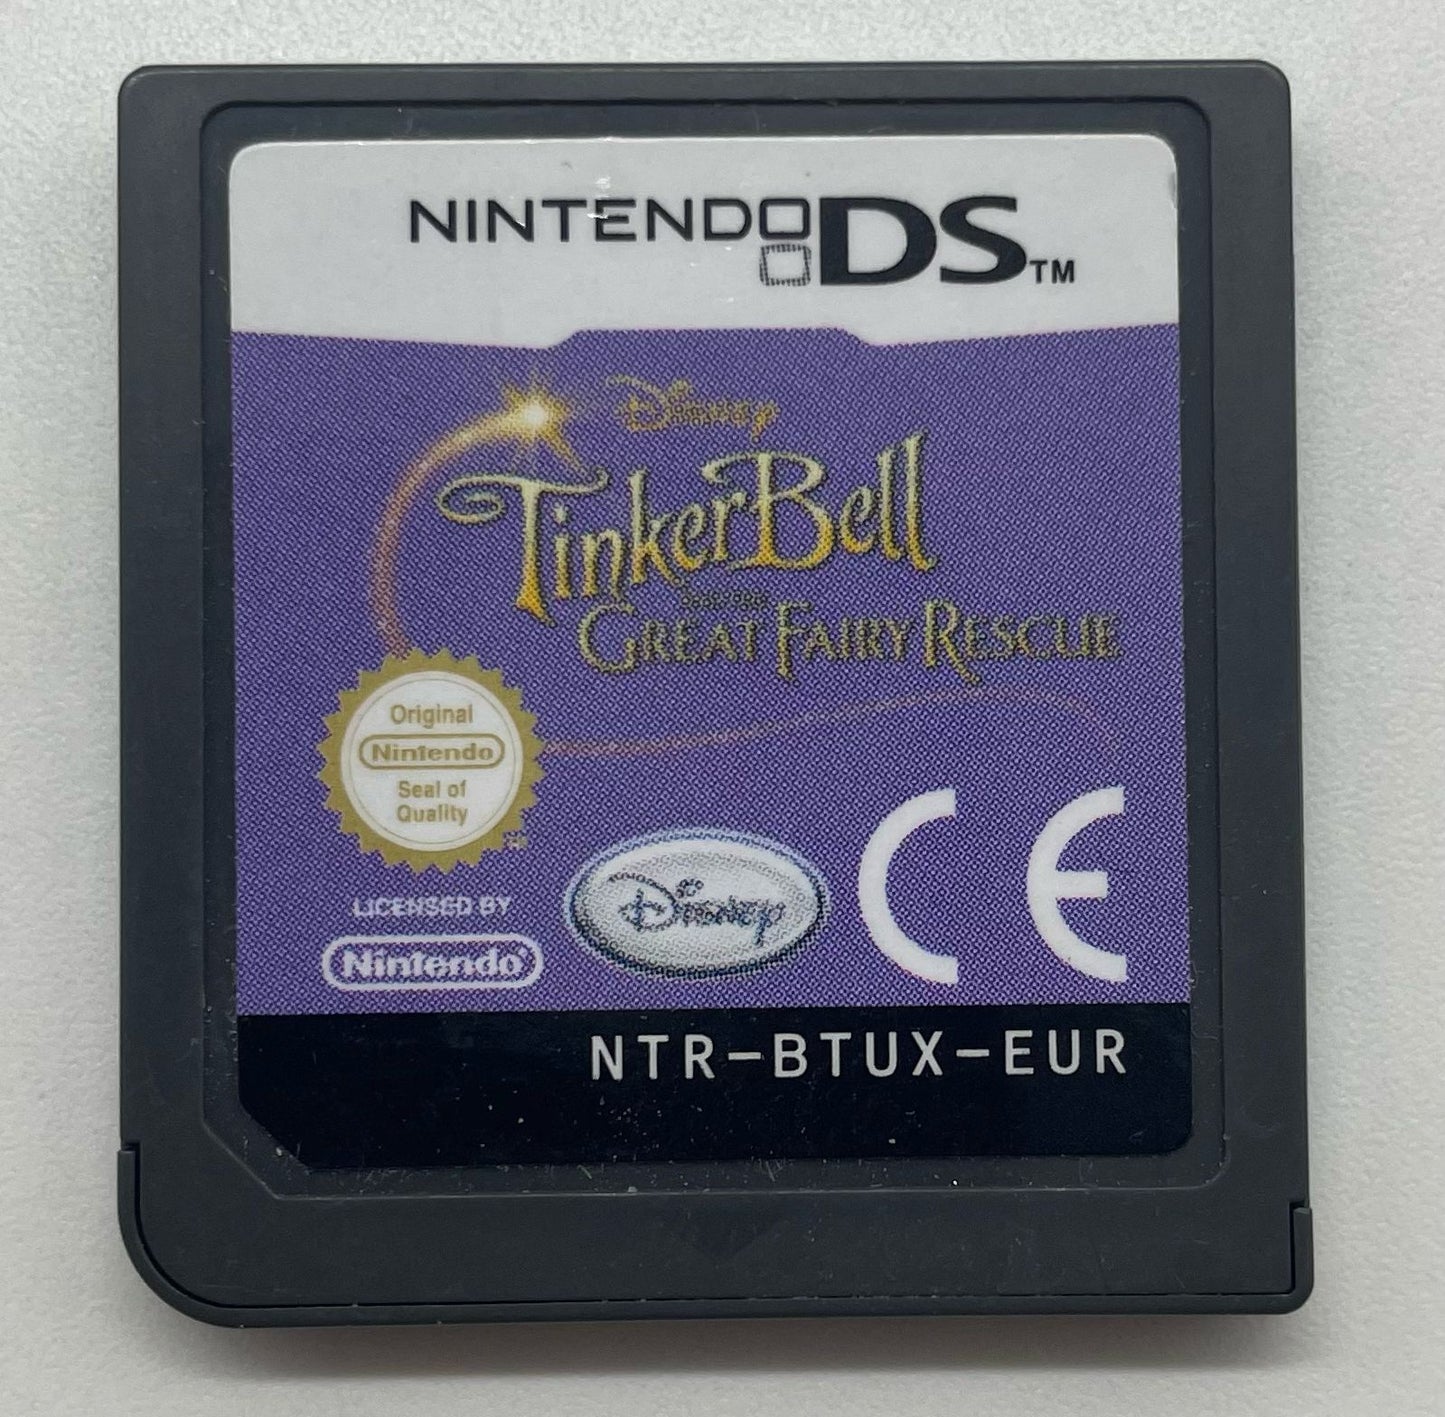 Disney Fairies: TinkerBell Great Faity Rescue DS